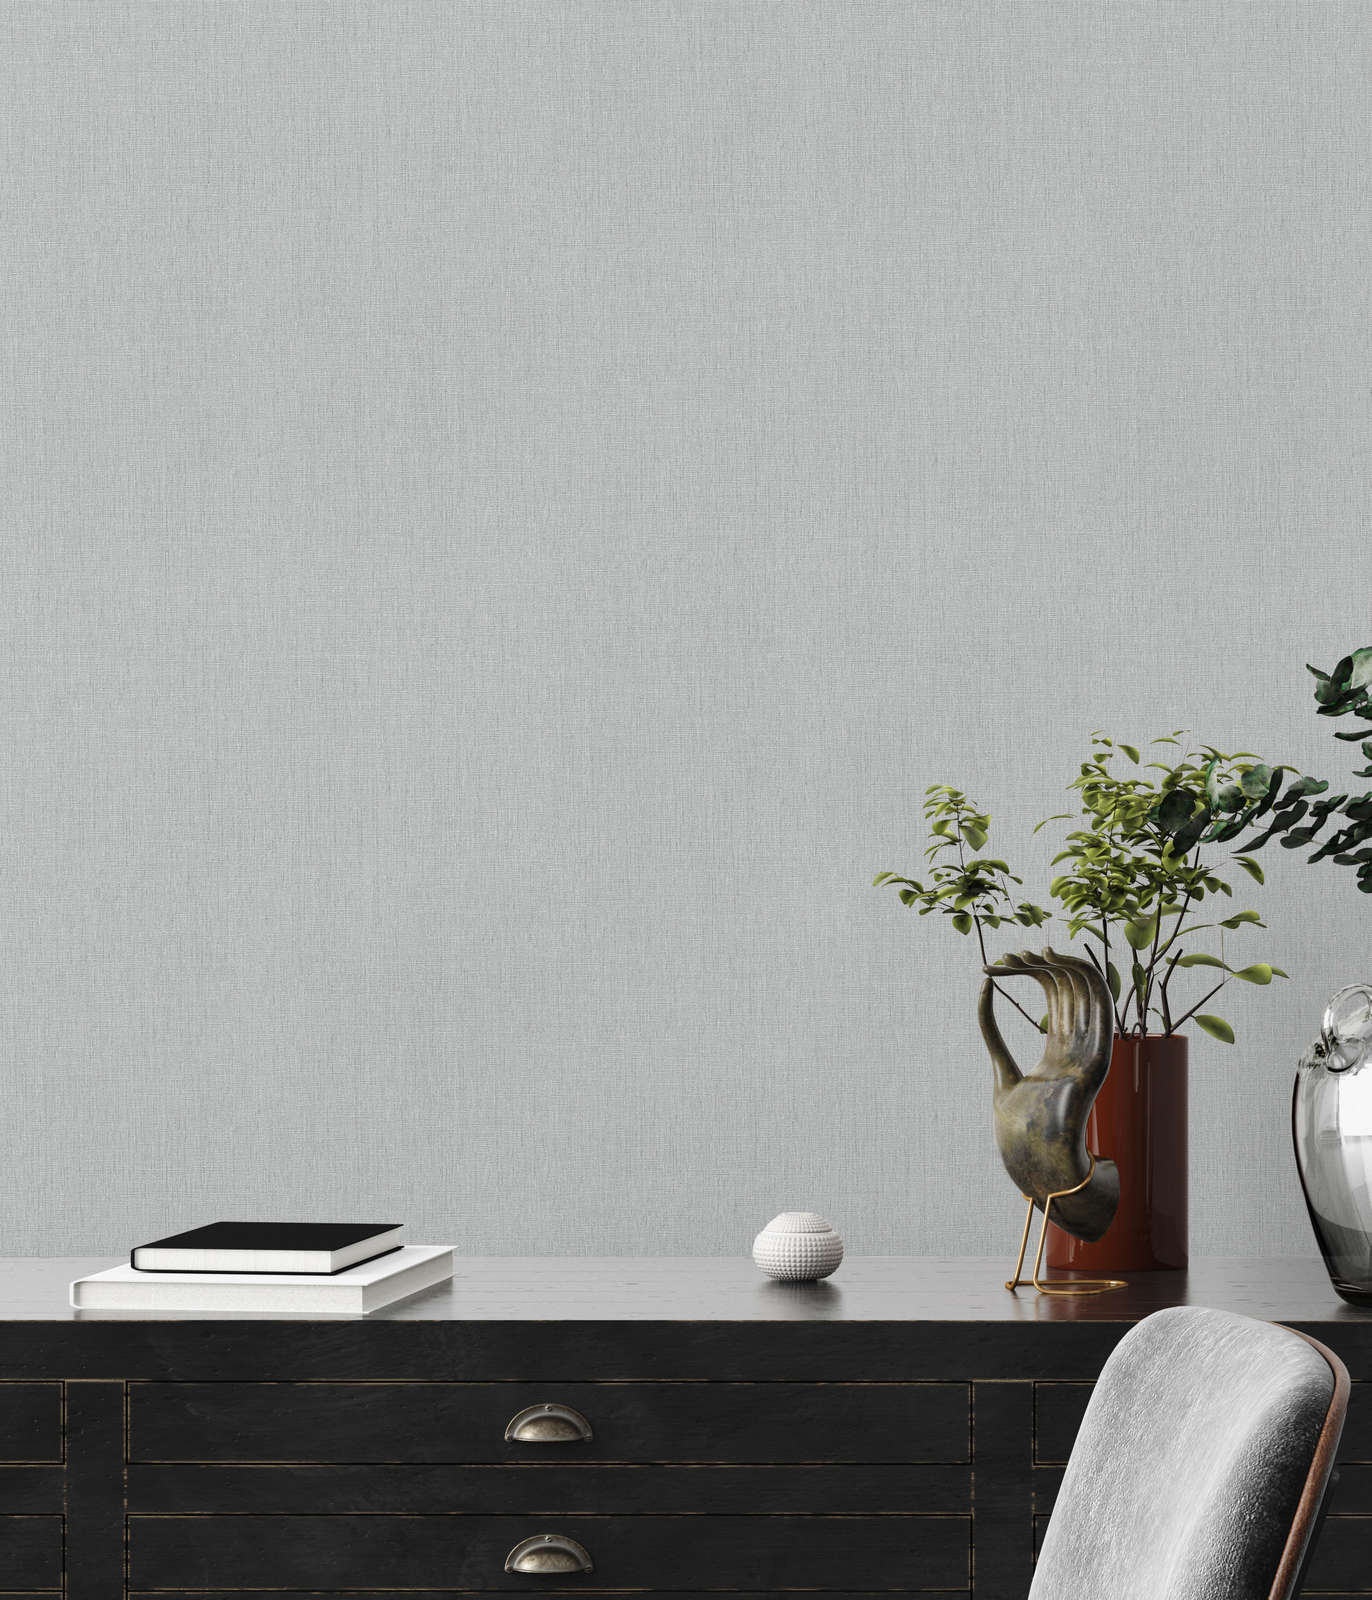             Plain wallpaper lightly textured in a simple shade - grey
        